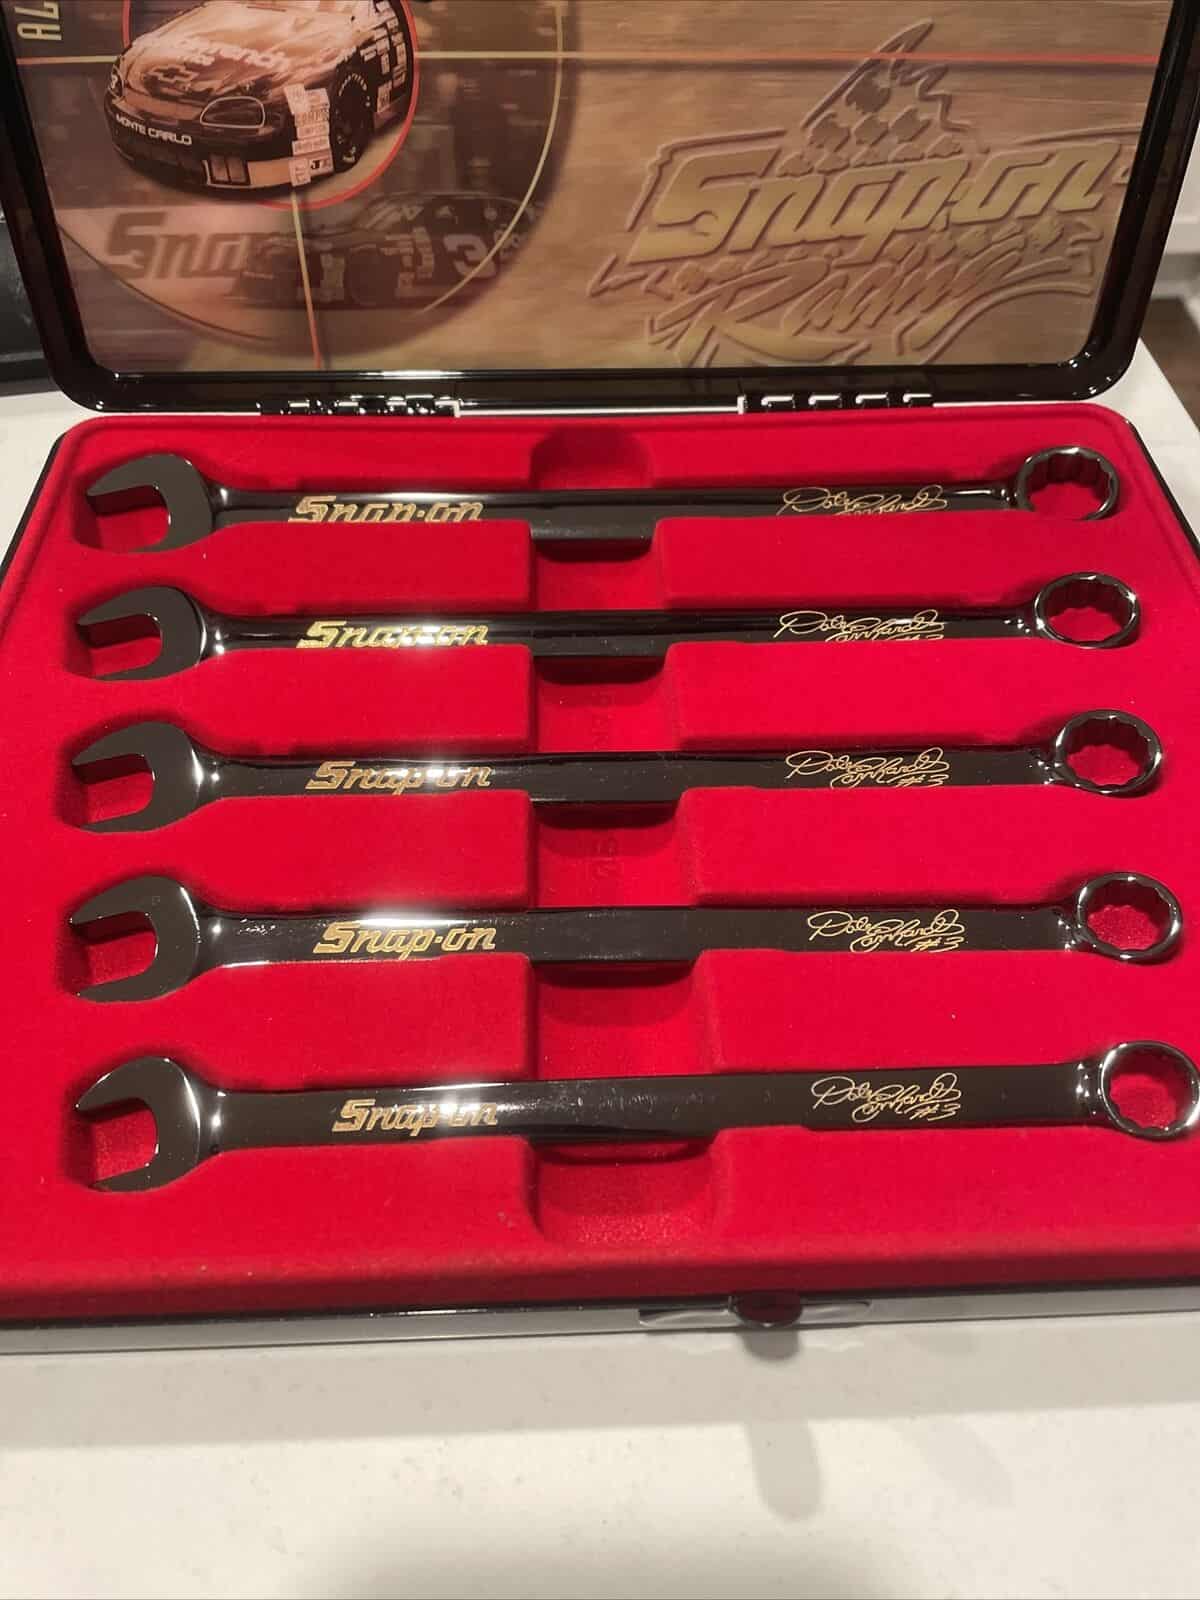 Dale Earnhardt Snap-On Signature Wrench Set